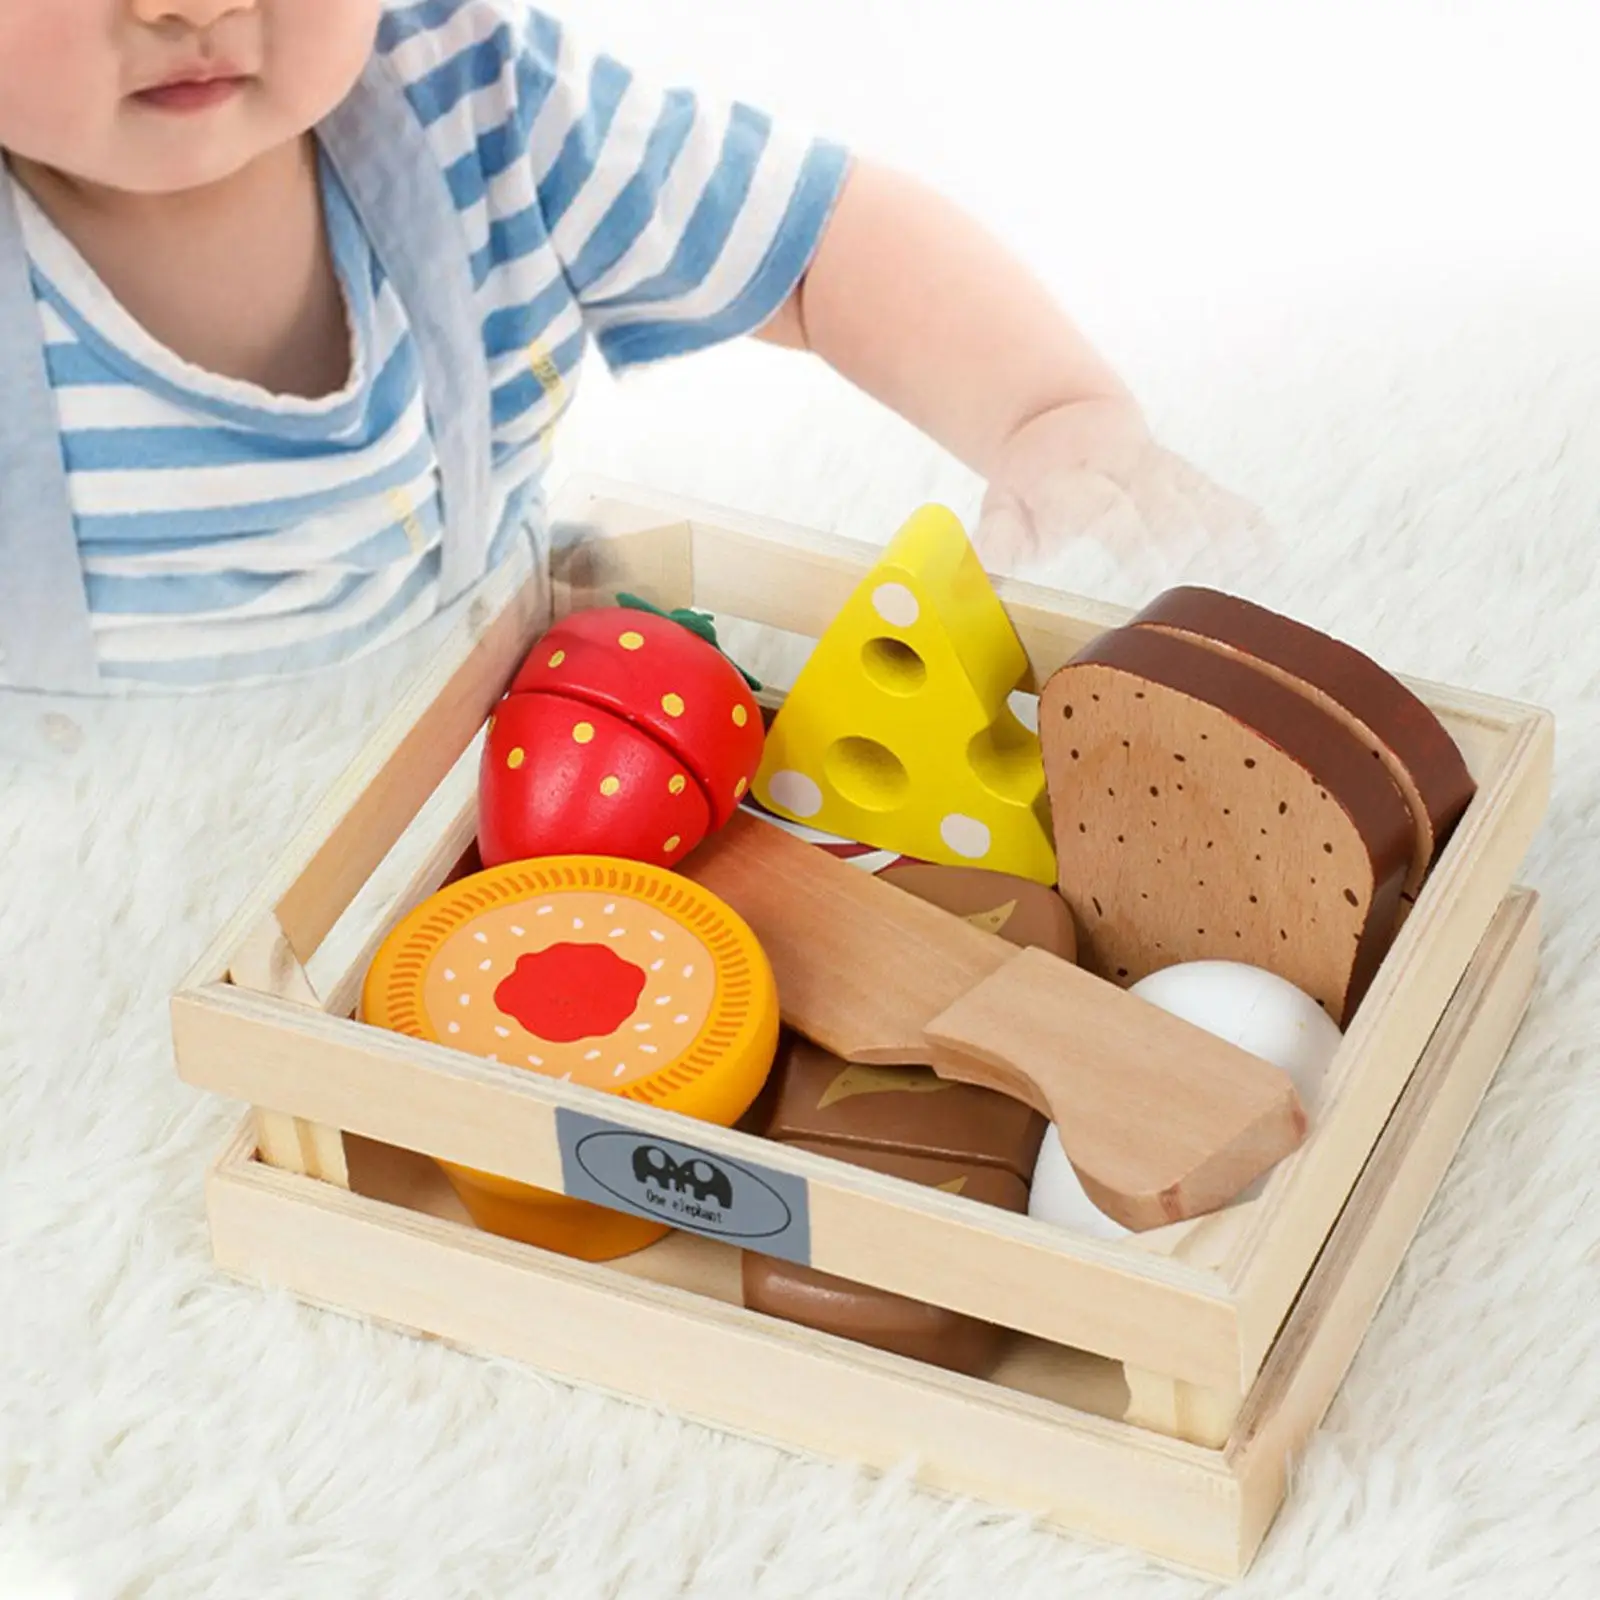 Kids Kitchen Set Wooden Classic Game Educational Toy Cutting Play Food Toy for Girls Boys Children Toddler Baby Birthday Gifts